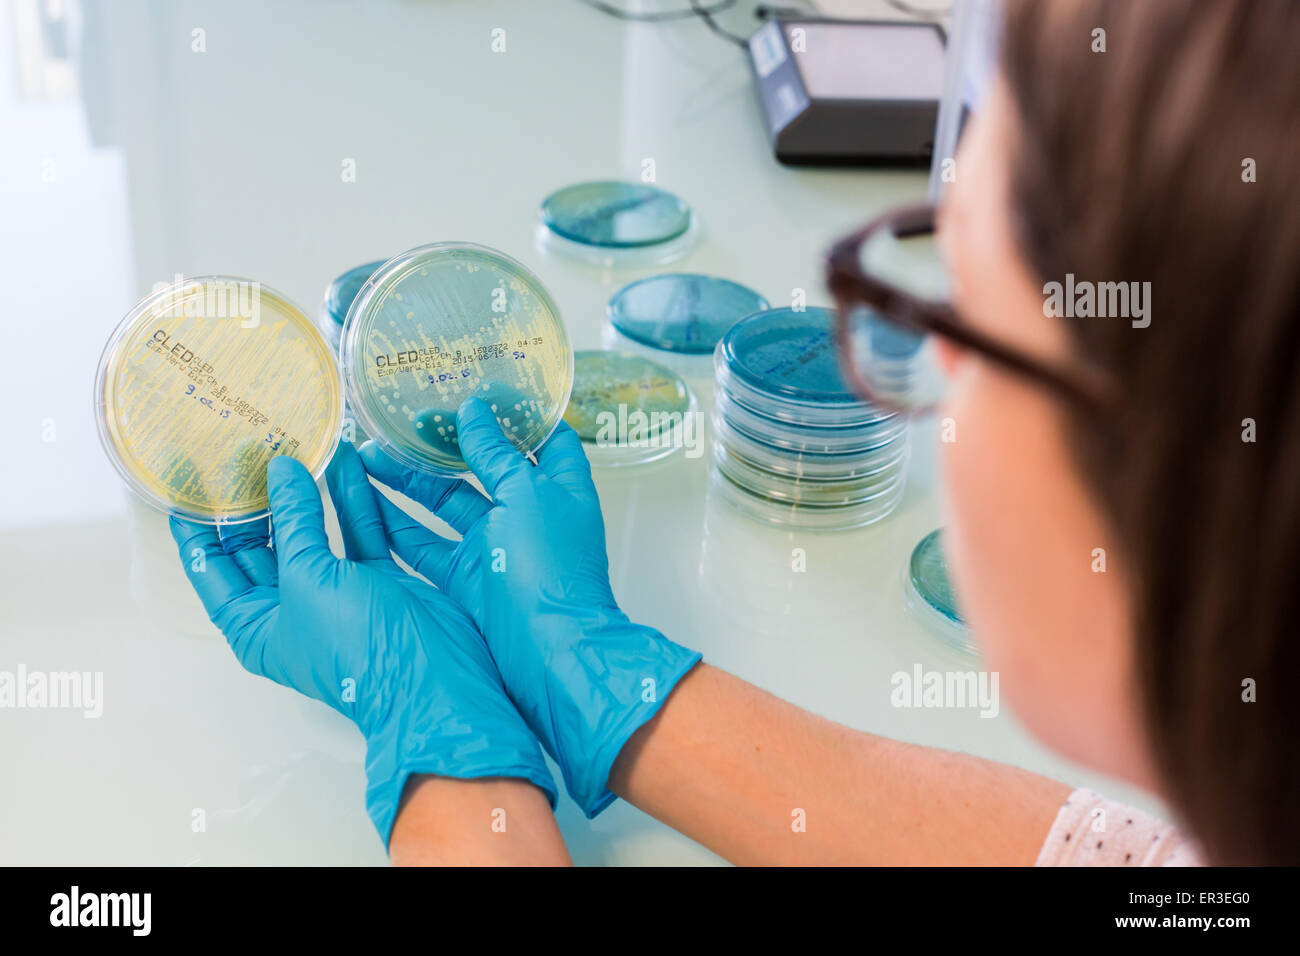 Hands holding a culture plate testing for the presence of Escherichia coli bacteria by looking at antibiotic resistance. Stock Photo